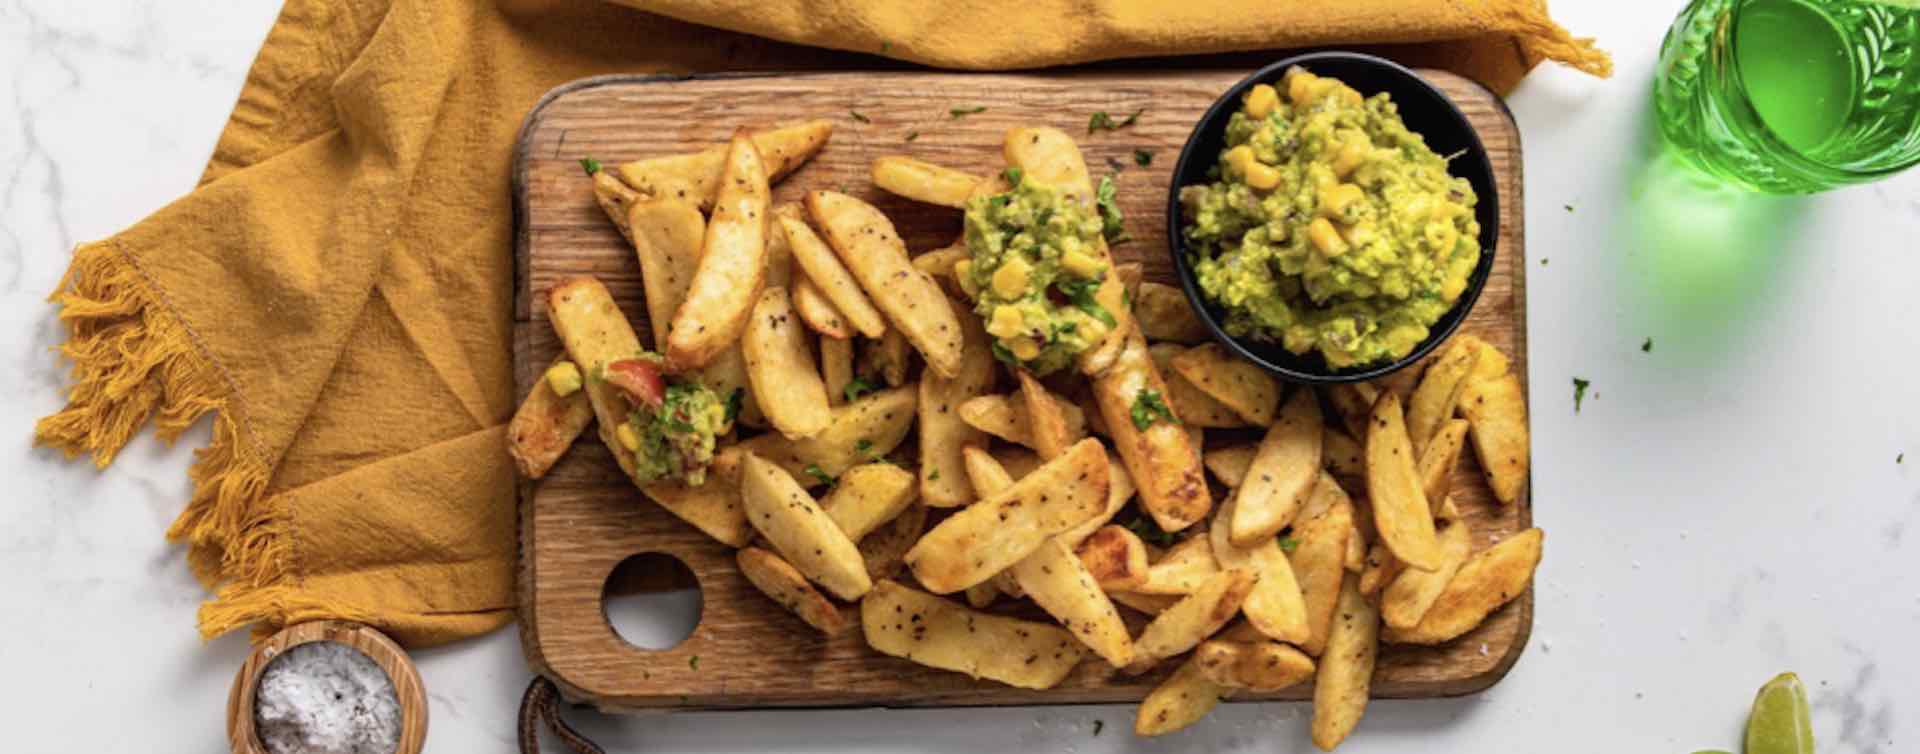 Oven Chips With Guacamole Dip